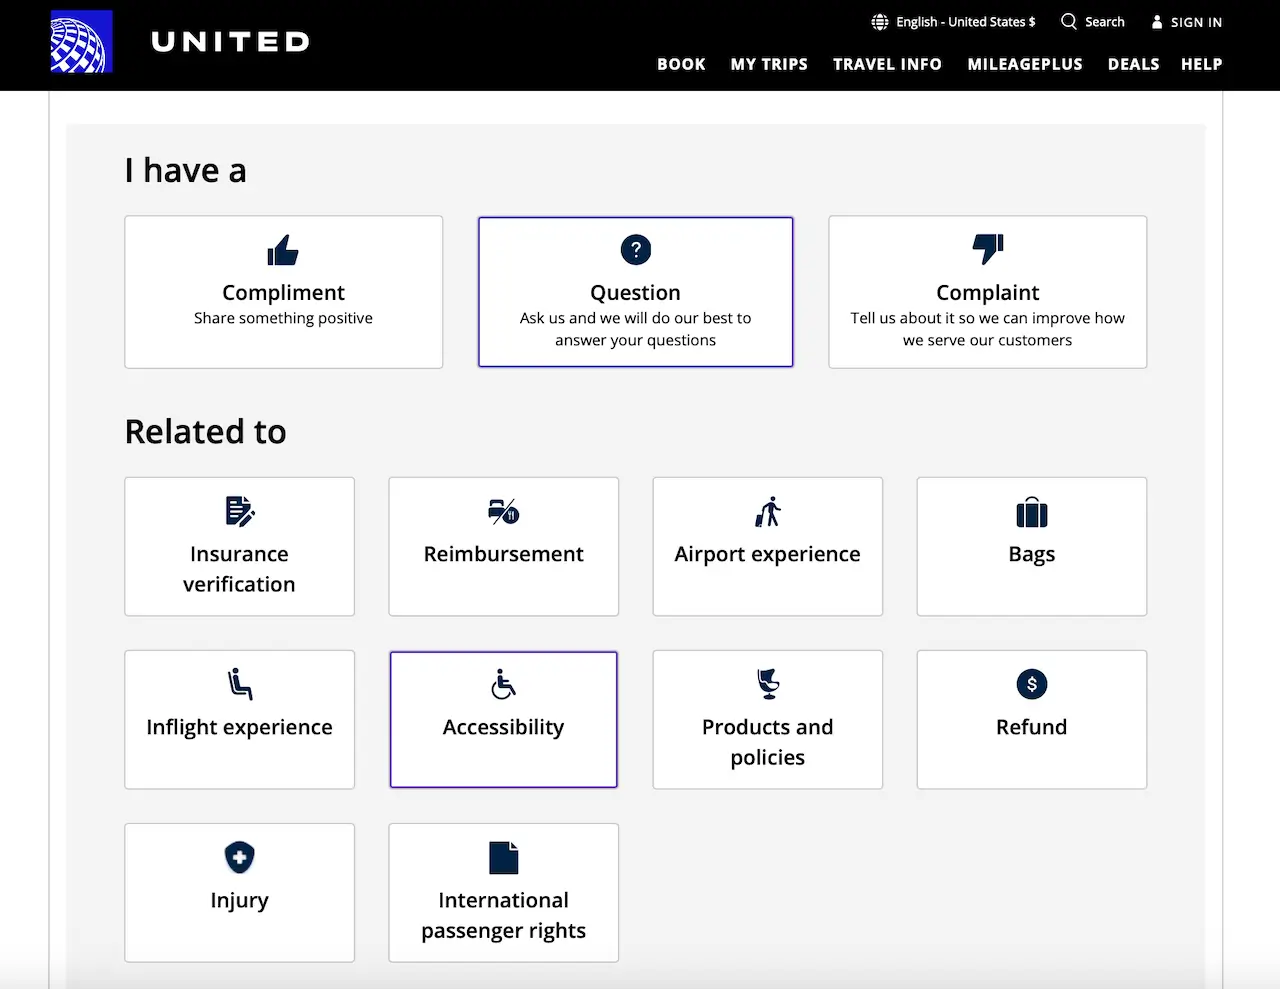 United Airlines Customer Help page